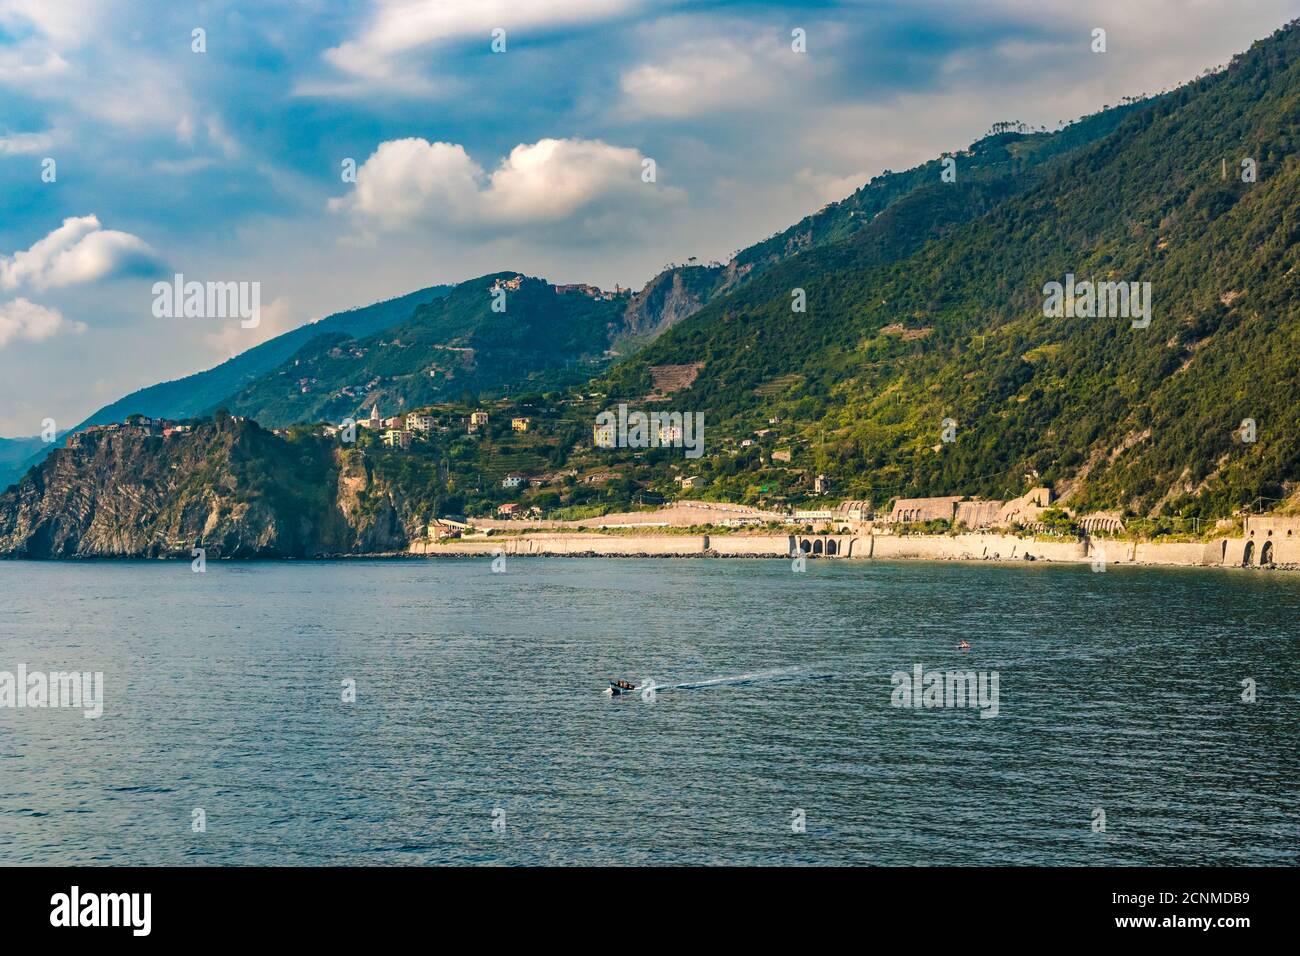 Panoramic view of the coastal area of Corniglia seen from Manarola. On the left side on top of the promontory is Corniglia and on the right side below... Stock Photo